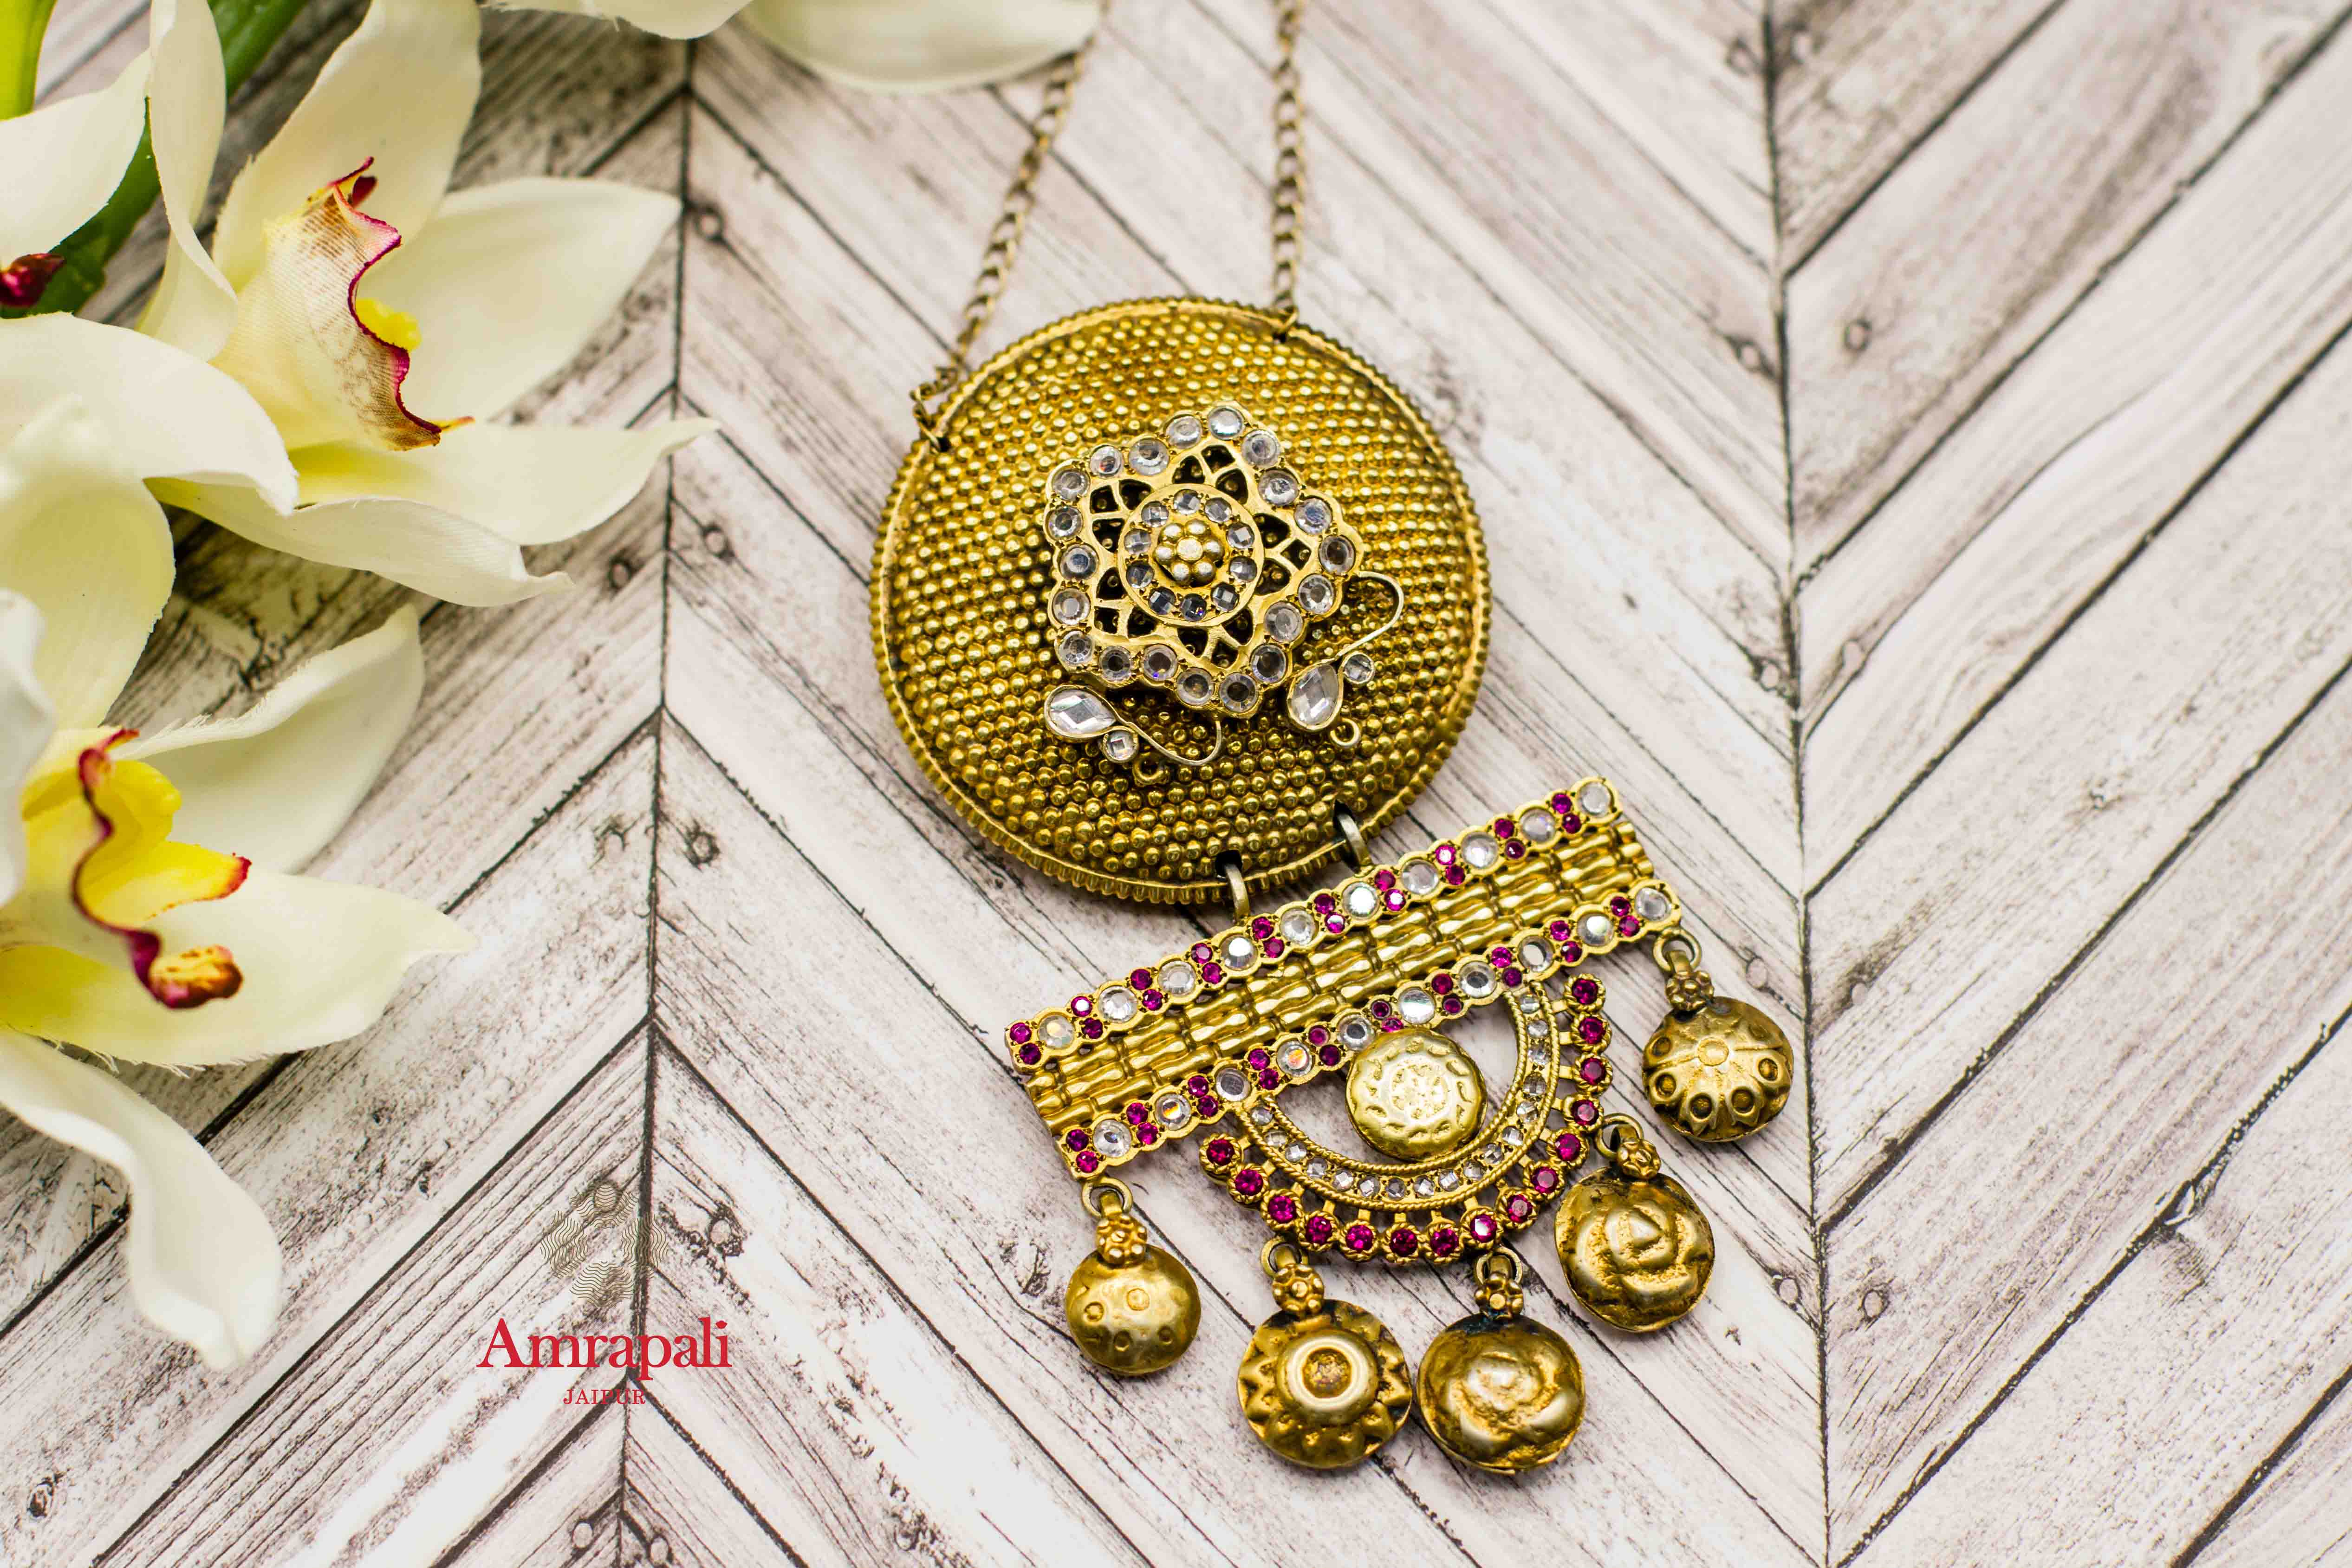 Buy Amrapali silver gold plated heavy pendant necklace online in USA. Complete your ethnic look with traditional Indian jewelry from Pure Elegance Indian fashion store in USA. Shop silver jewelry, wedding jewelry for Indian brides in USA from our online store.-flatlay